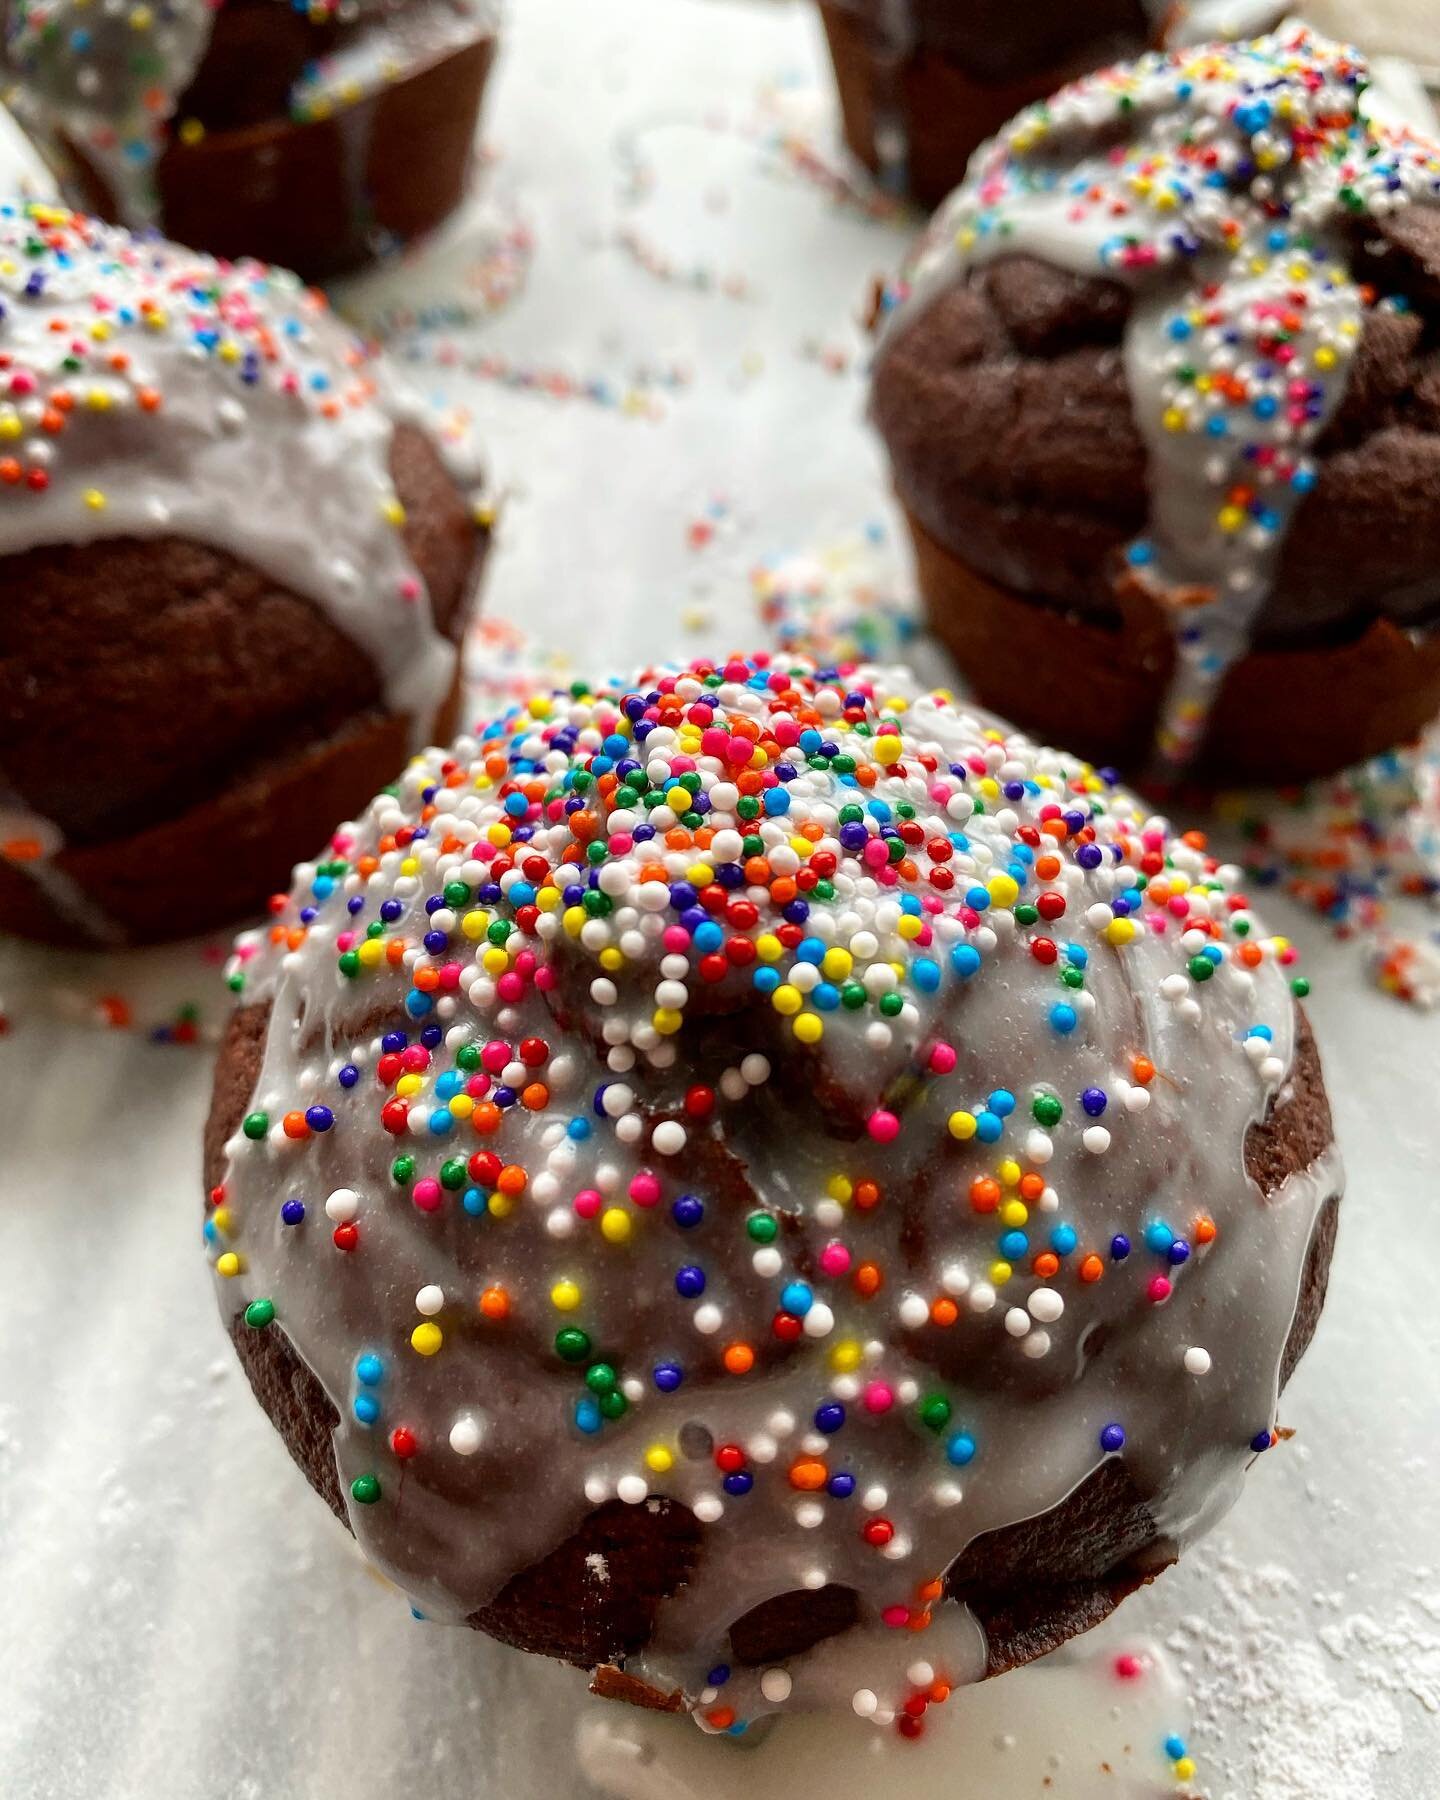 Dark chocolate cupcakes made healthier.  Made with whole grain oat flour, maple syrup, olive oil, and dark cocoa. 
Sweet frosting glaze and sprinkles are entirely optional. 

Ingredients:
2 cups oat flour ( I recommend using commercial variety, such 